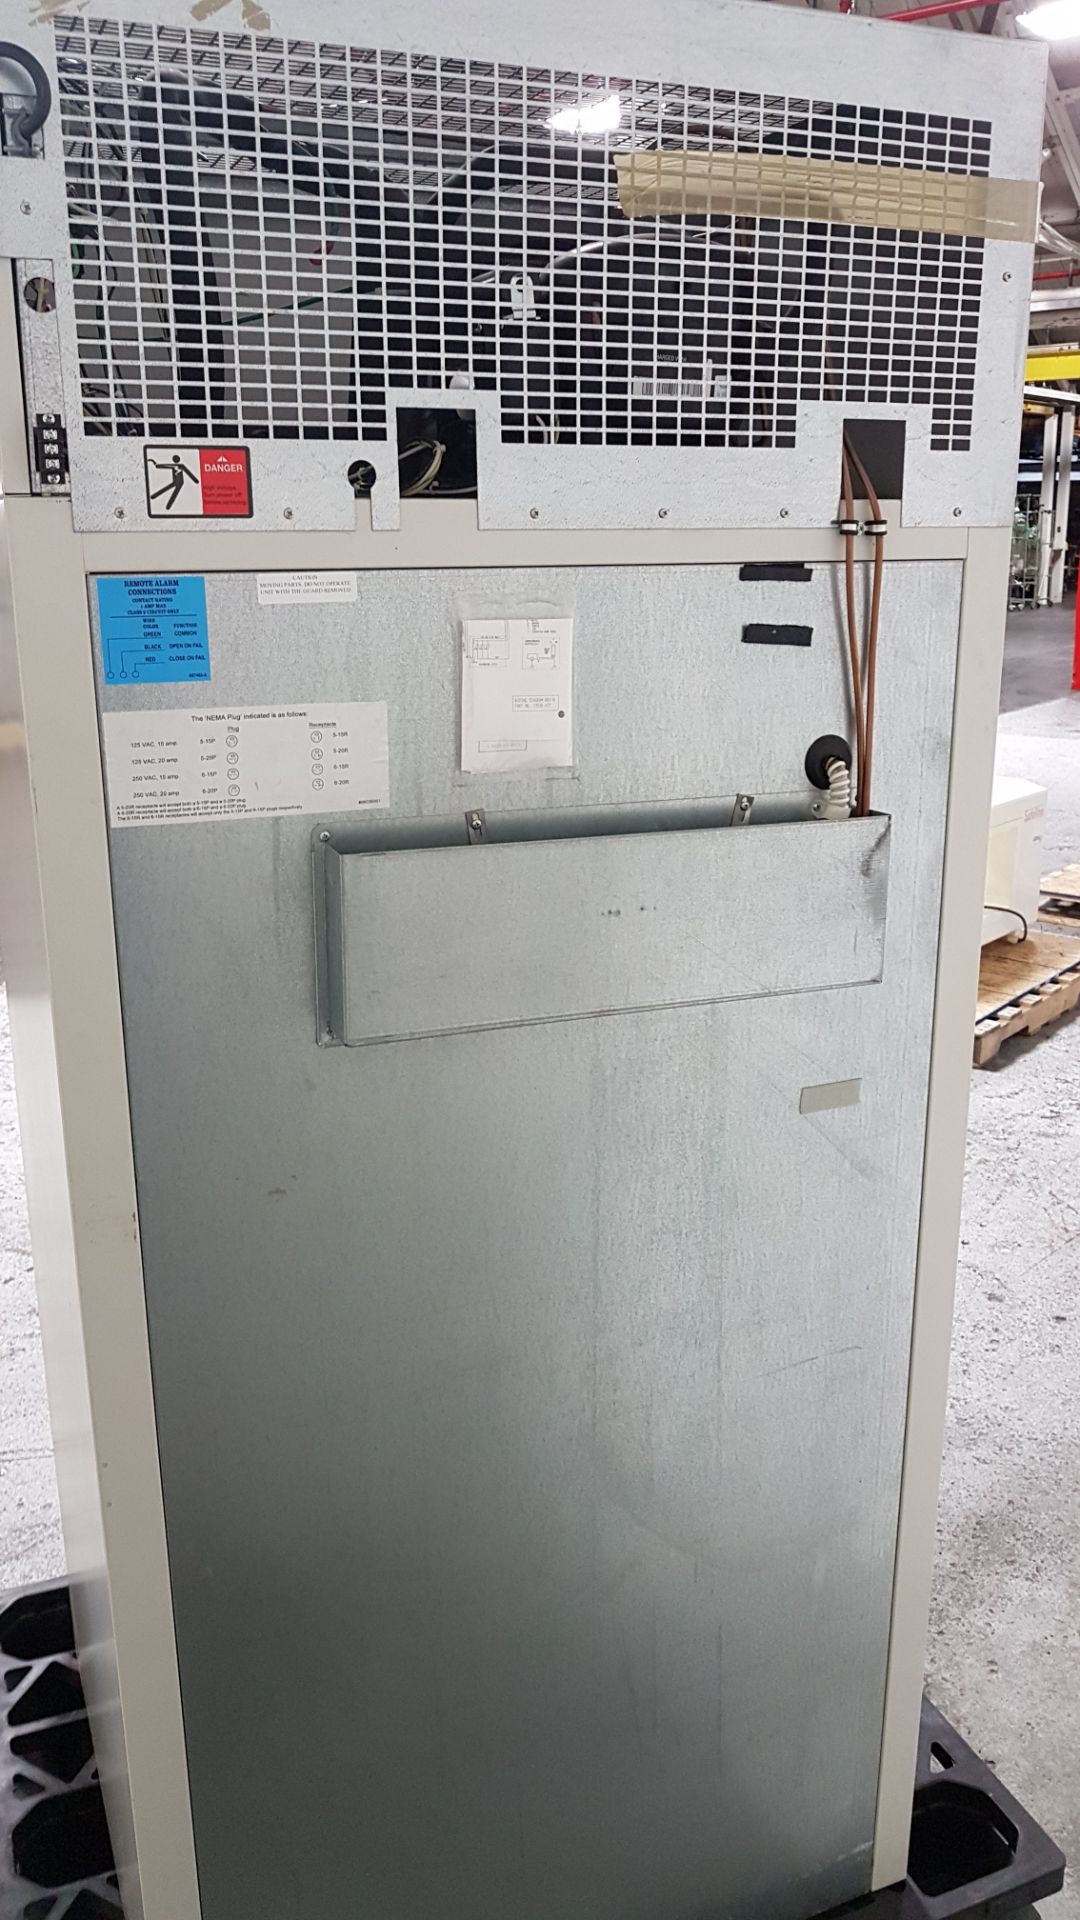 Thermo Electron freezer, model REL3004A21, 29" W x 26" D x 52"H chamber, 115 volts. - Image 4 of 18